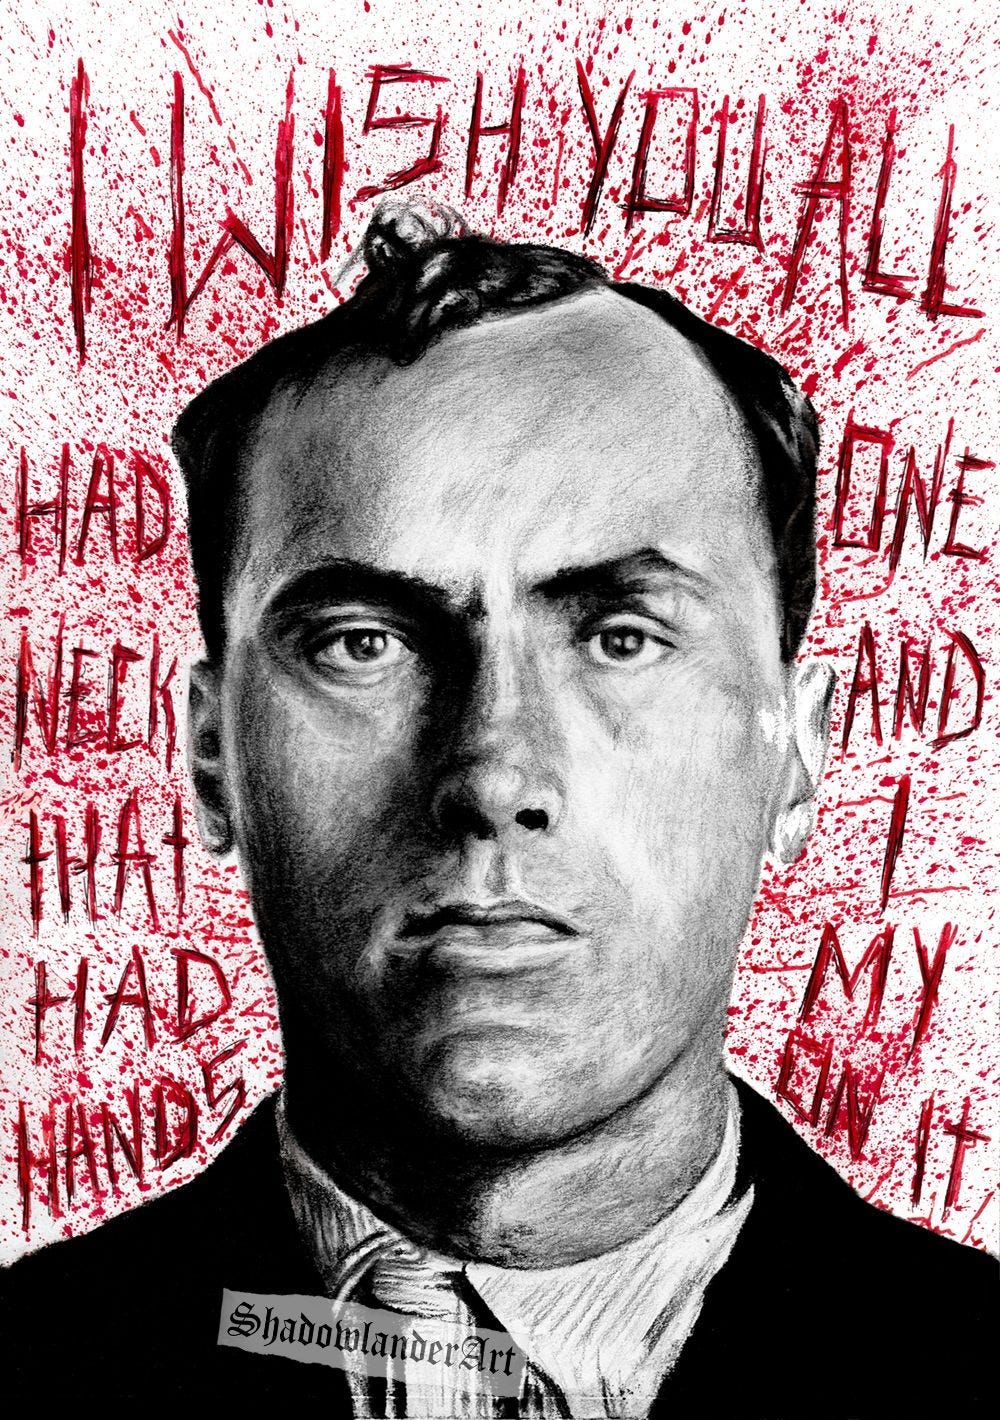 An art of Carl Panzram with his quote written behind